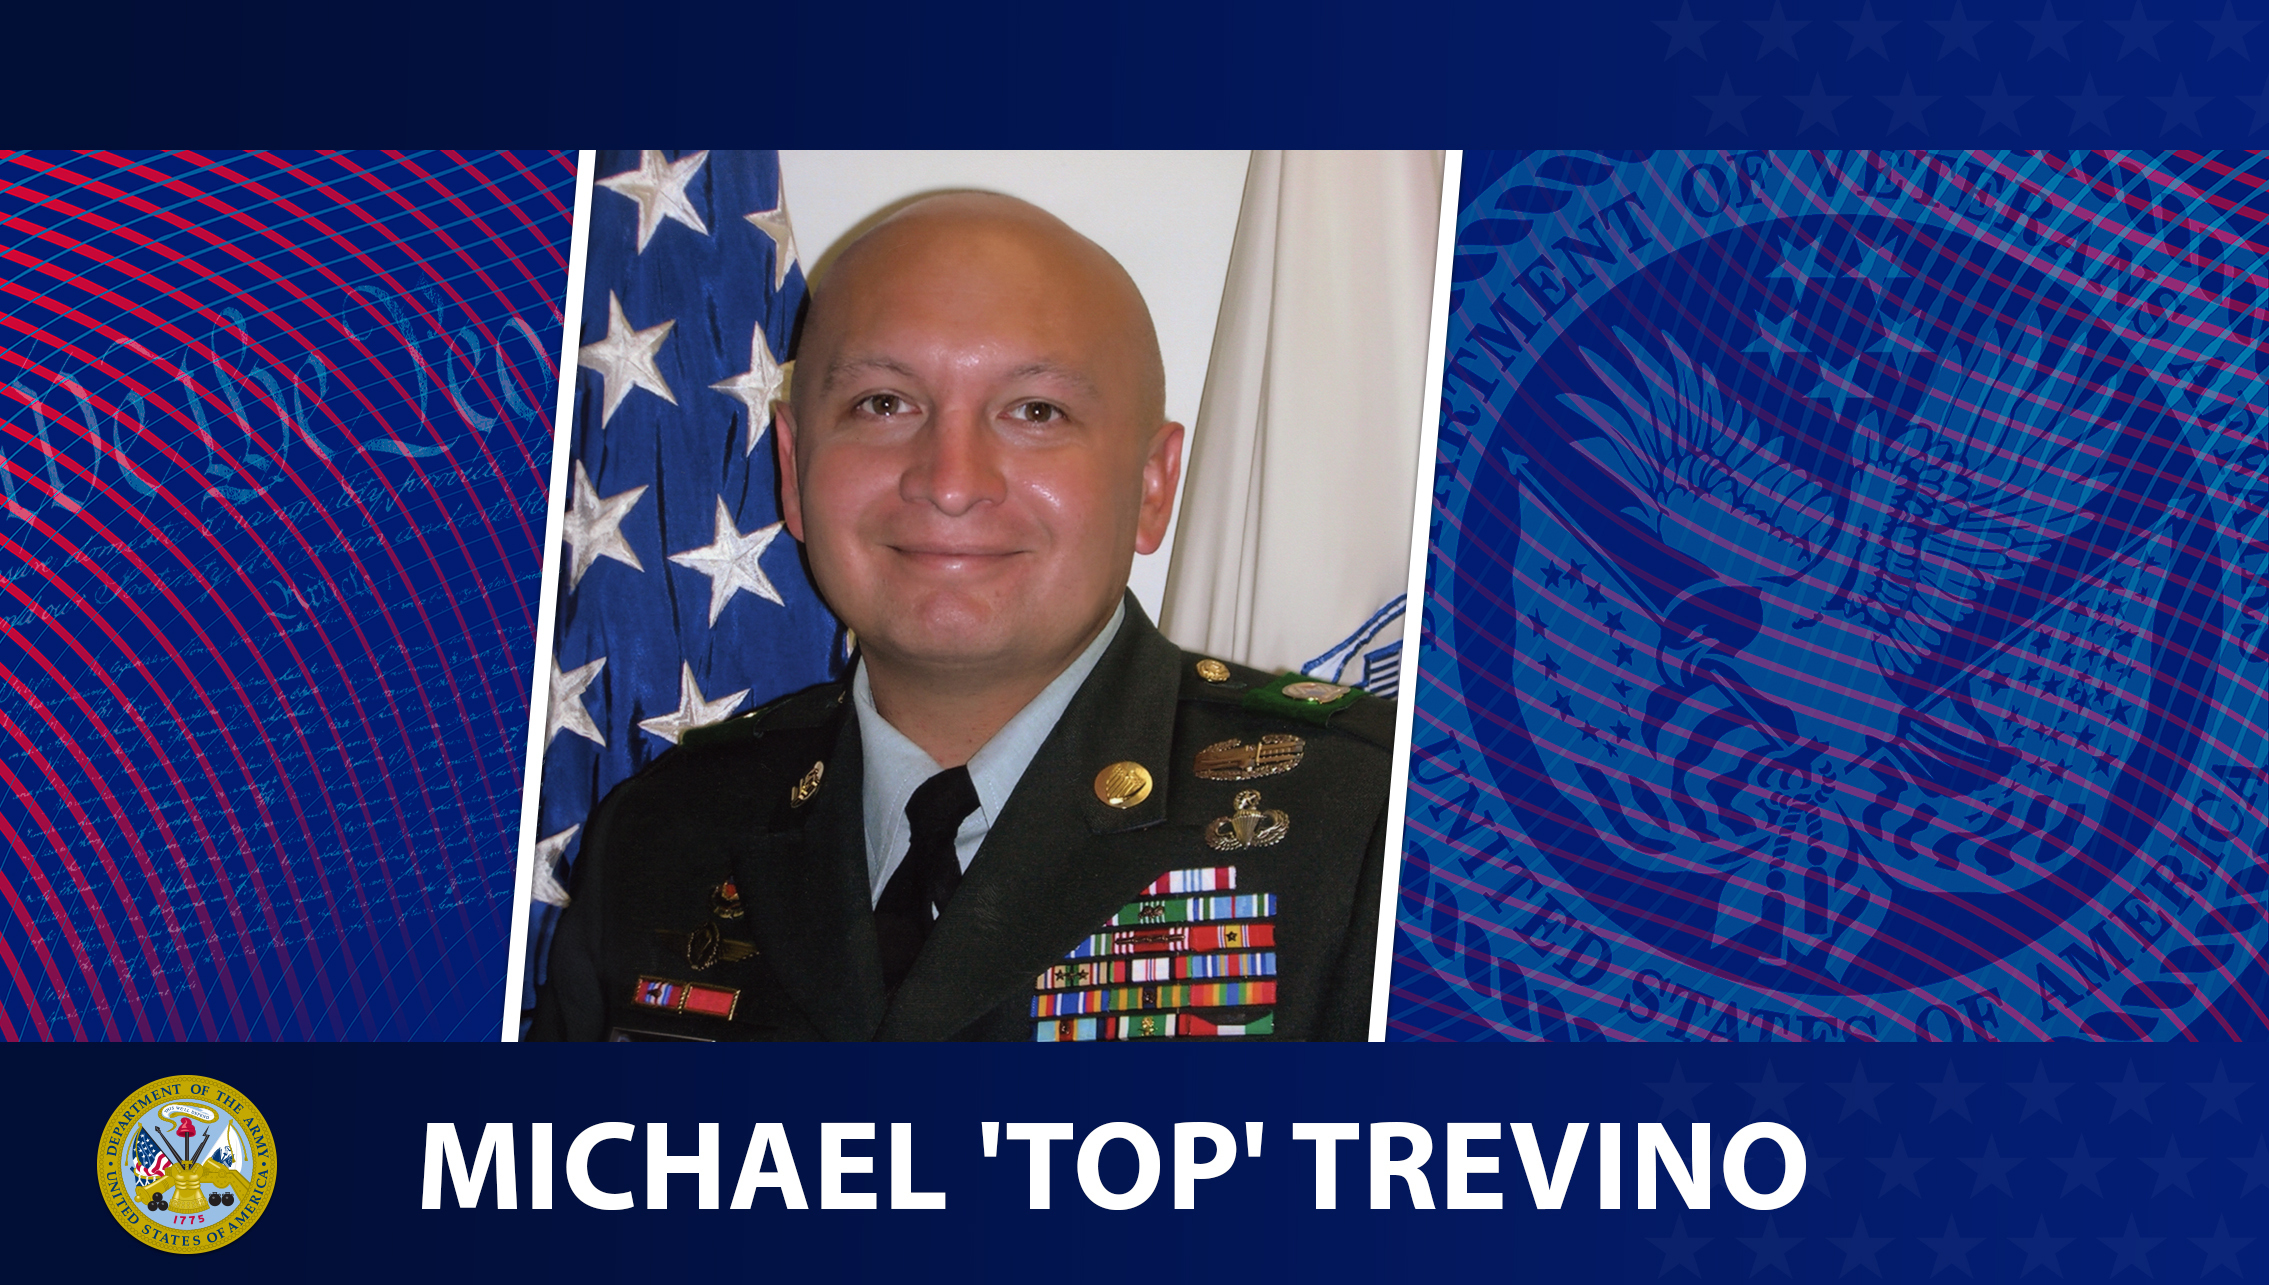 In honor of National Park Service's National Park Week, this week's Honoring Veterans spotlight honors the service of Army Veteran Michael Trevino, who today works as a facility manager at Reconstruction Era National Historical Park.